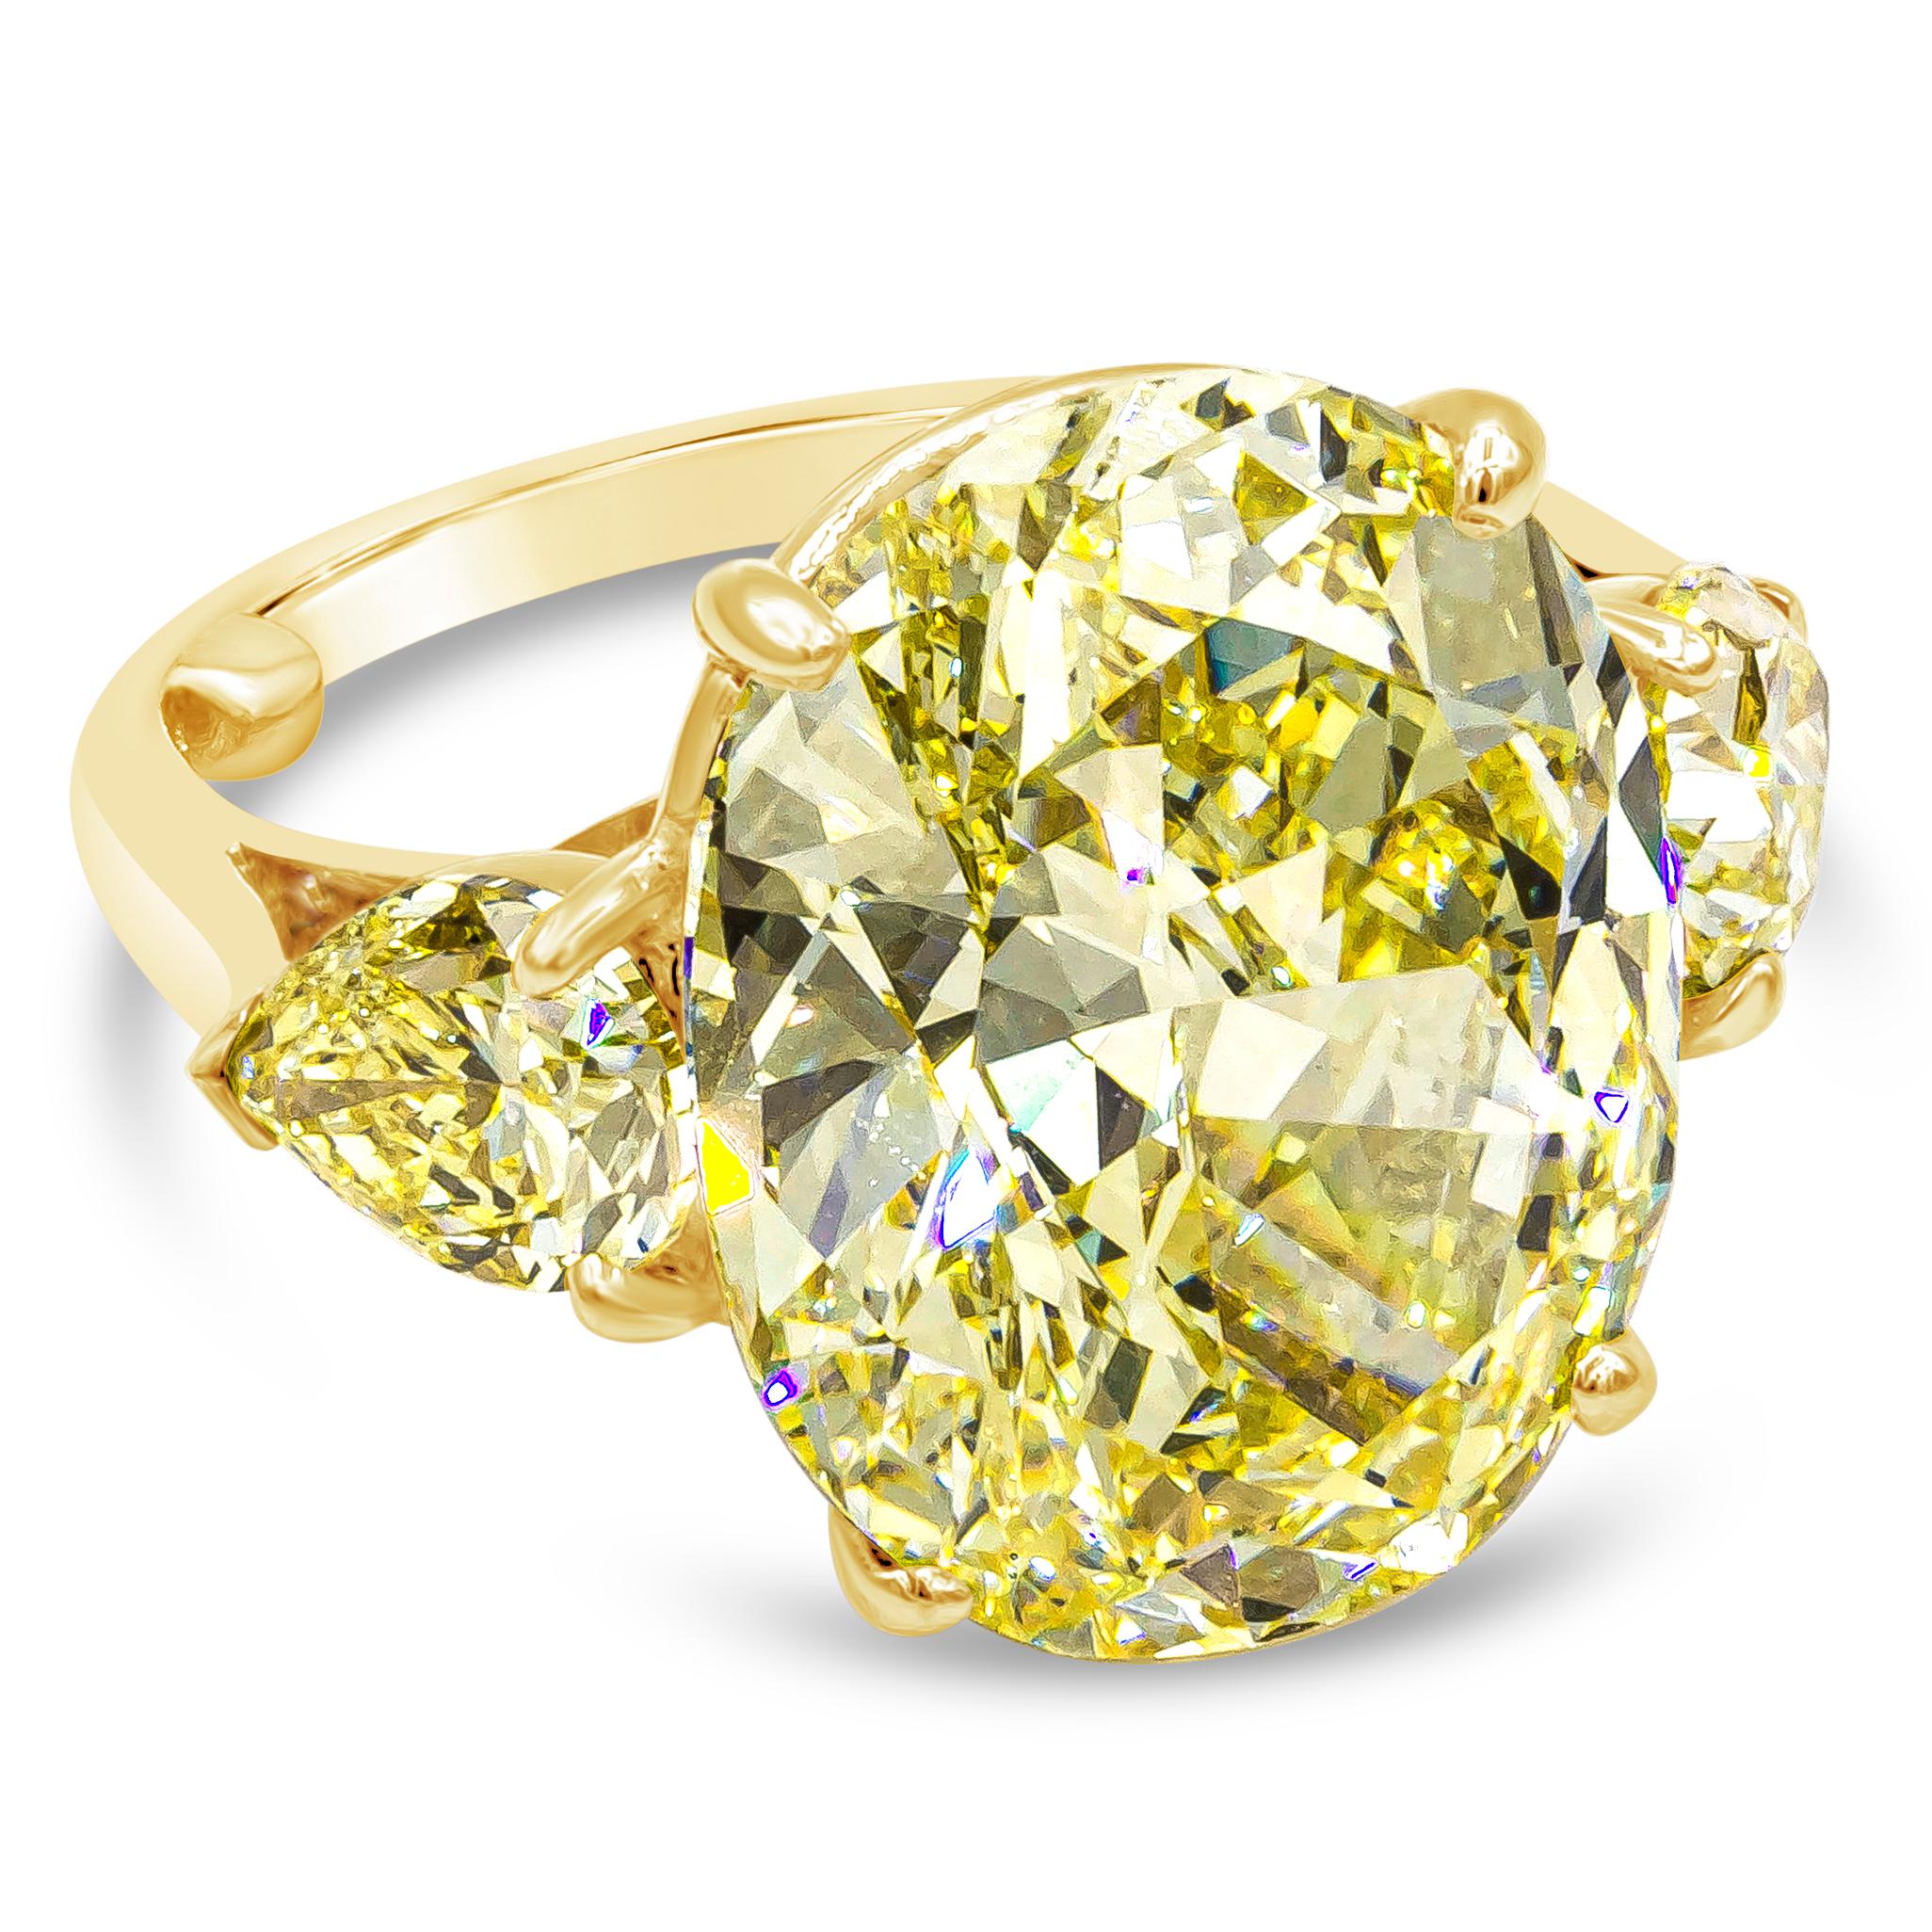 Well crafted color rich three stone engagement ring showcasing a vibrant 13.46 carat oval cut yellow diamond certified by GIA as fancy intense yellow, VS1 clarity, set in a four prong 18k yellow gold basket. Flanking the center stone are two GIA